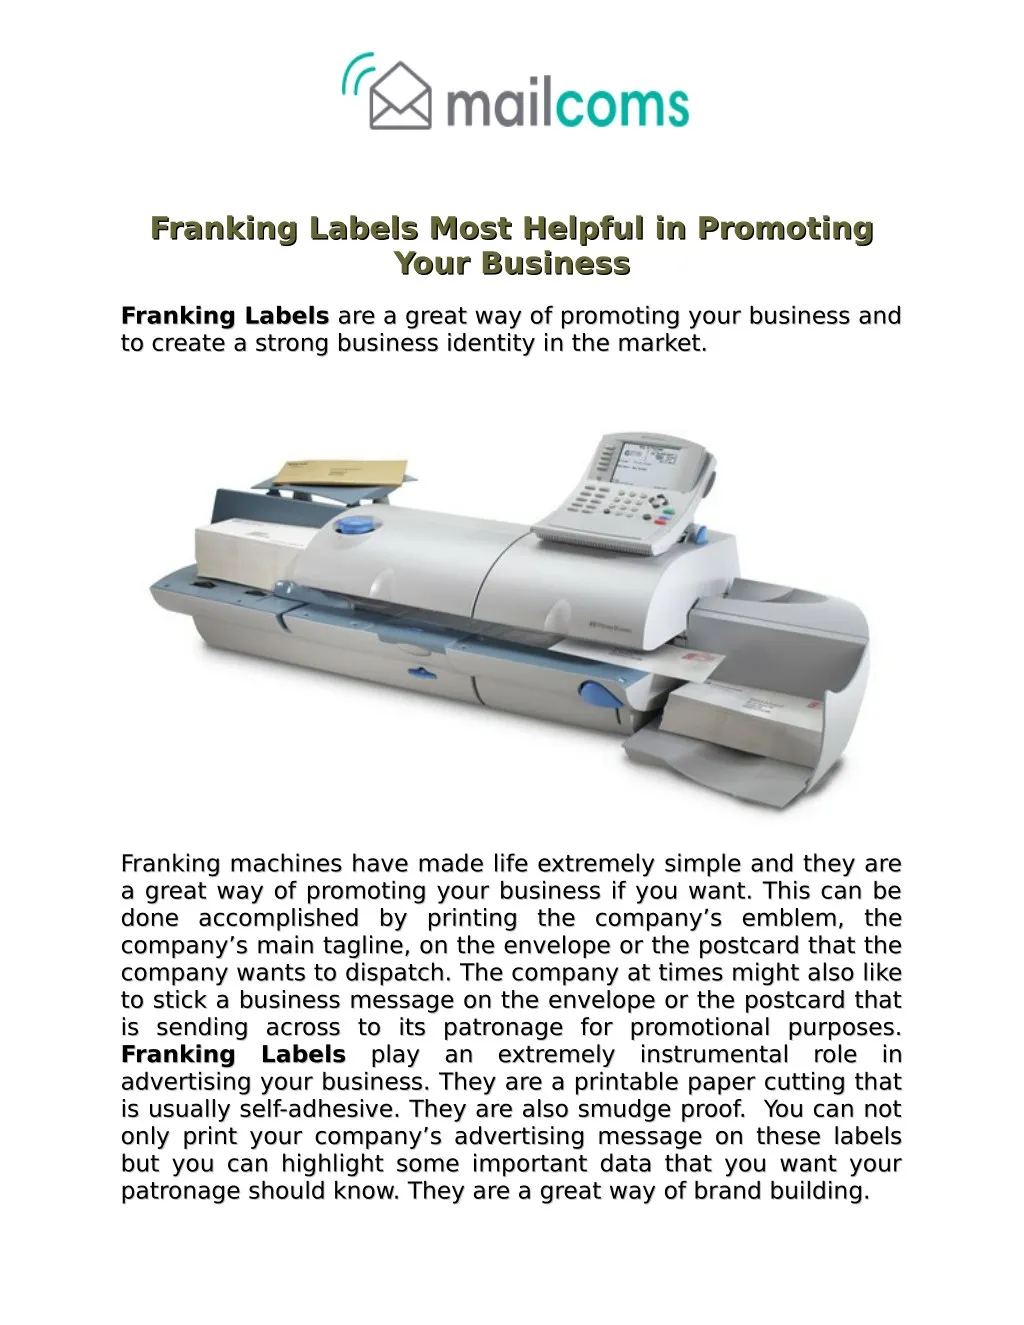 franking labels most helpful in promoting